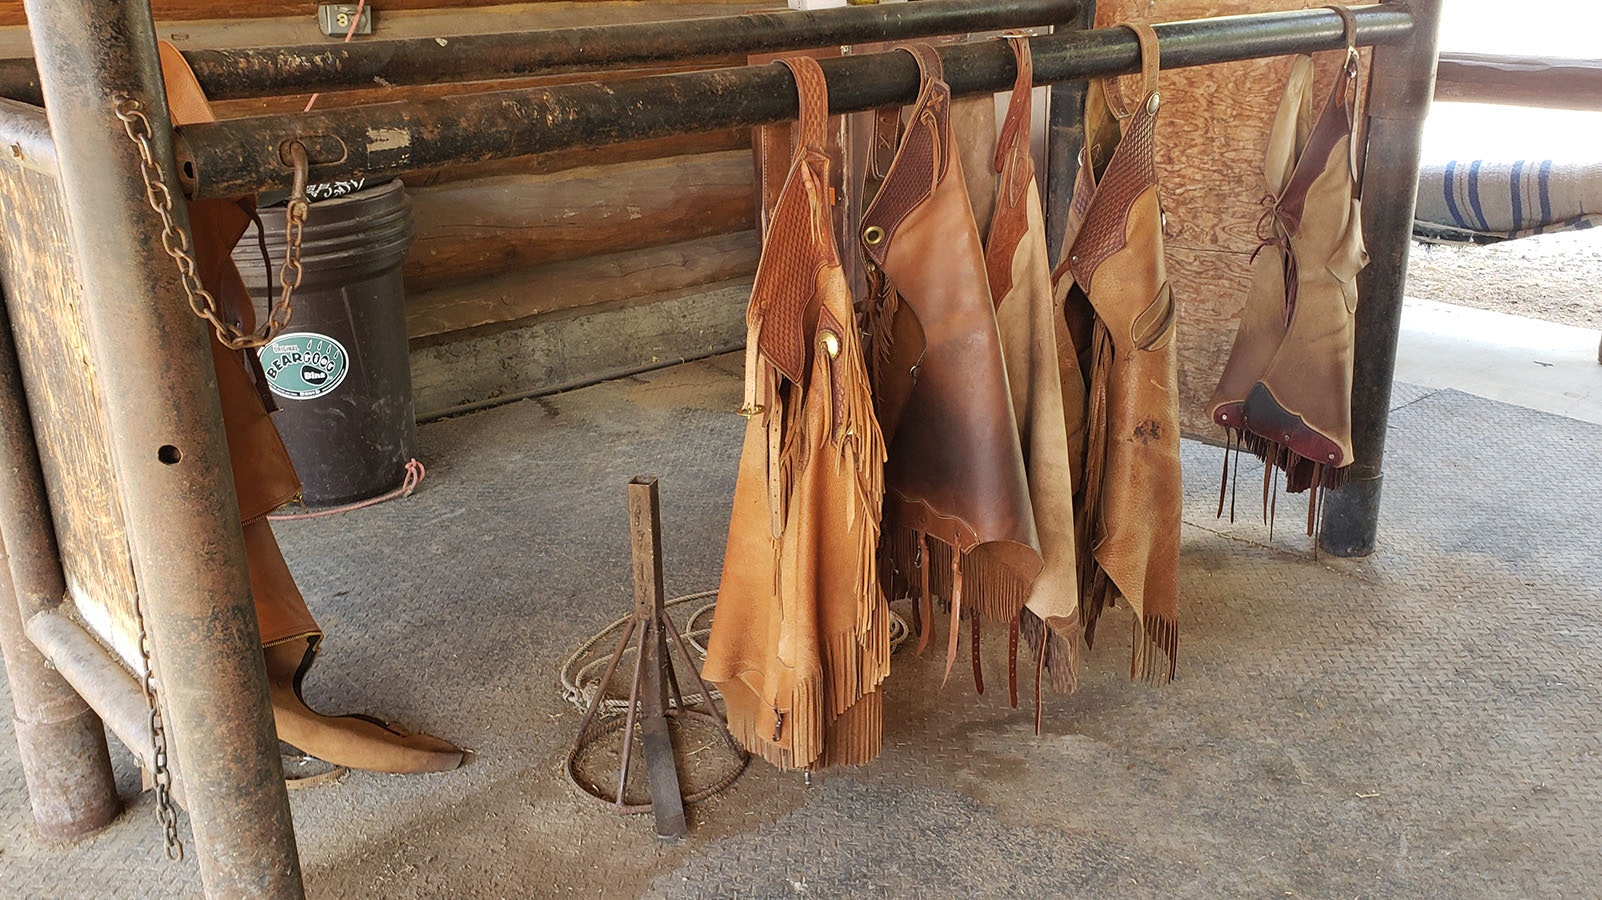 Chaps hanging to dry after a long day of hard work.